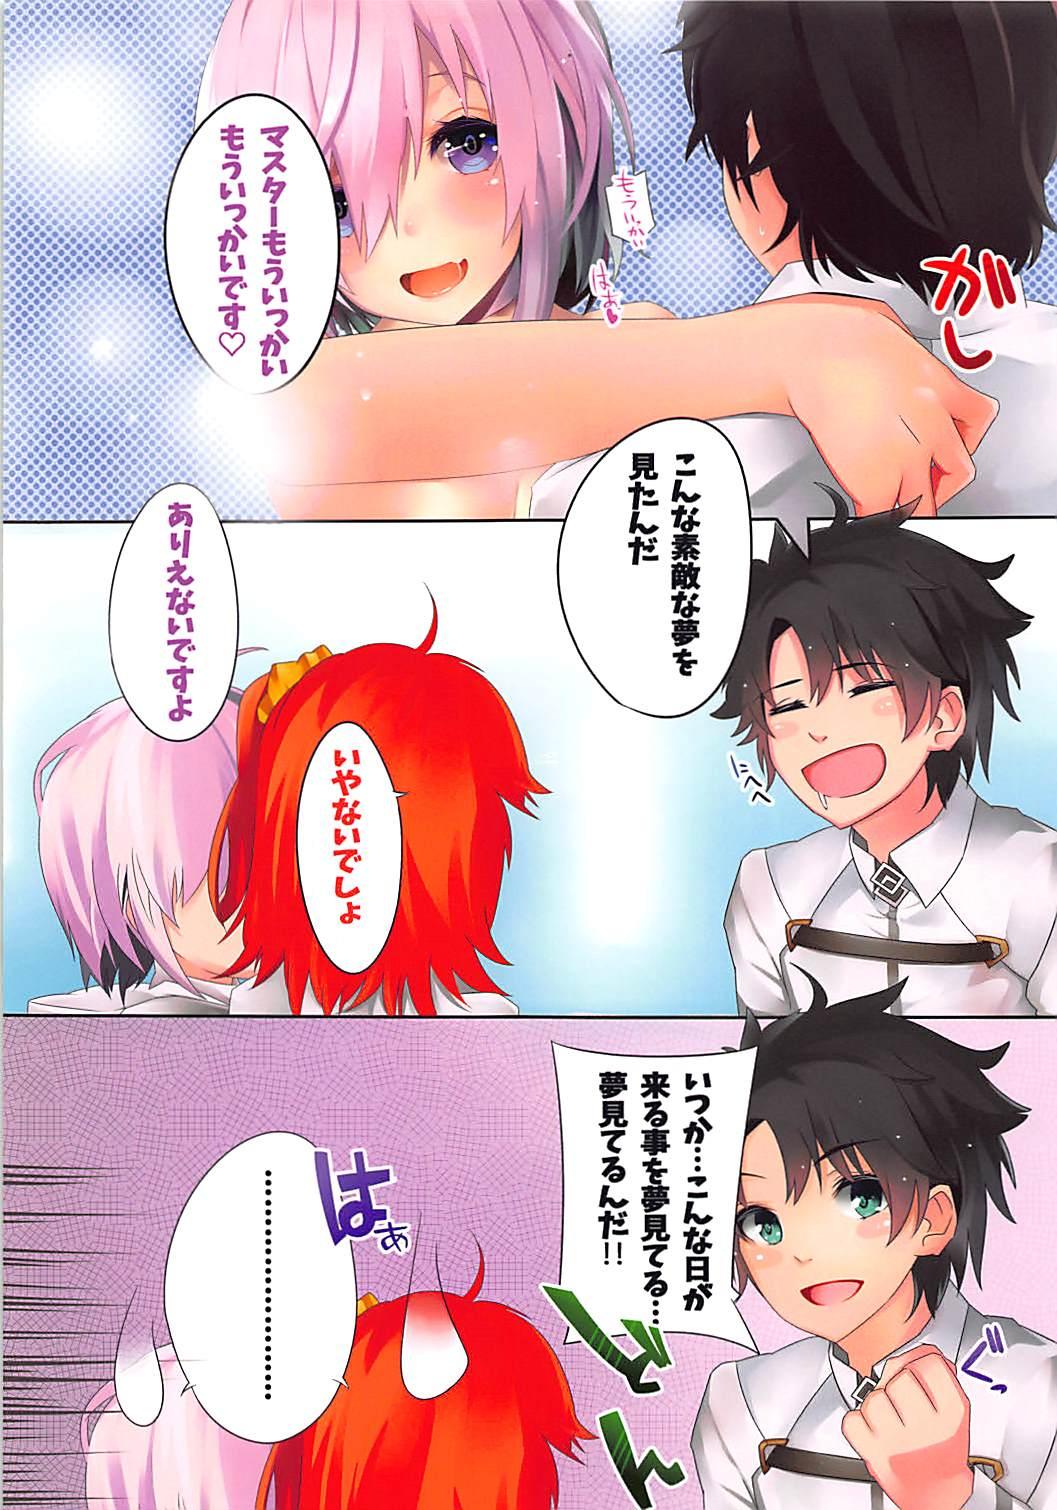 Blows Marshmallow to Tate - Fate grand order Ball Busting - Page 10